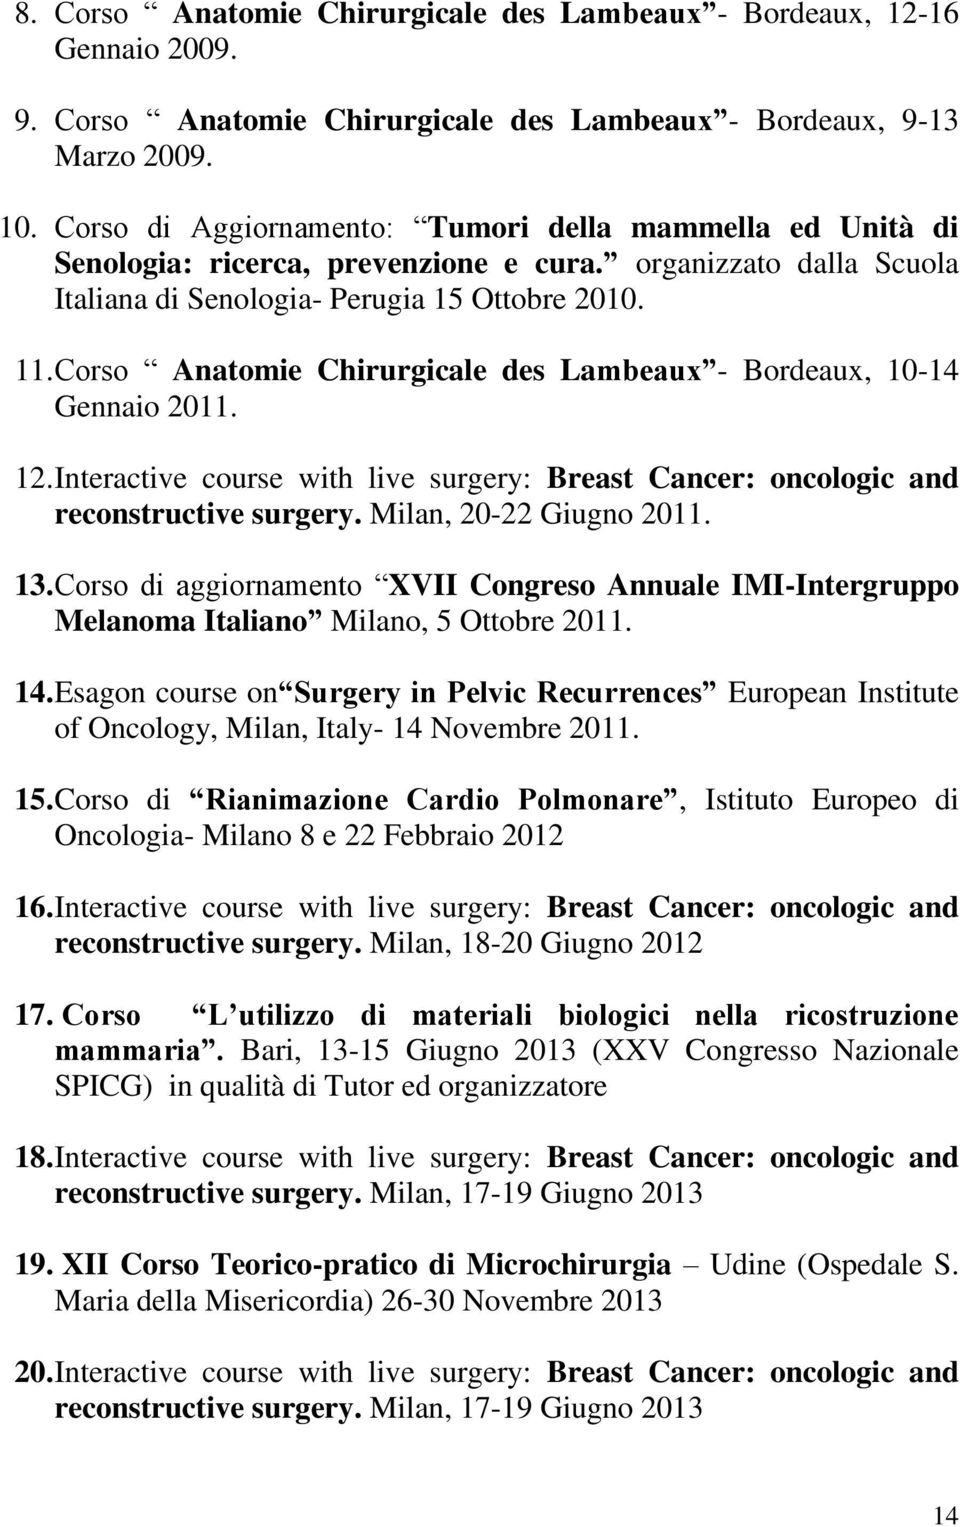 Corso Anatomie Chirurgicale des Lambeaux - Bordeaux, 10-14 Gennaio 2011. 12. Interactive course with live surgery: Breast Cancer: oncologic and reconstructive surgery. Milan, 20-22 Giugno 2011. 13.